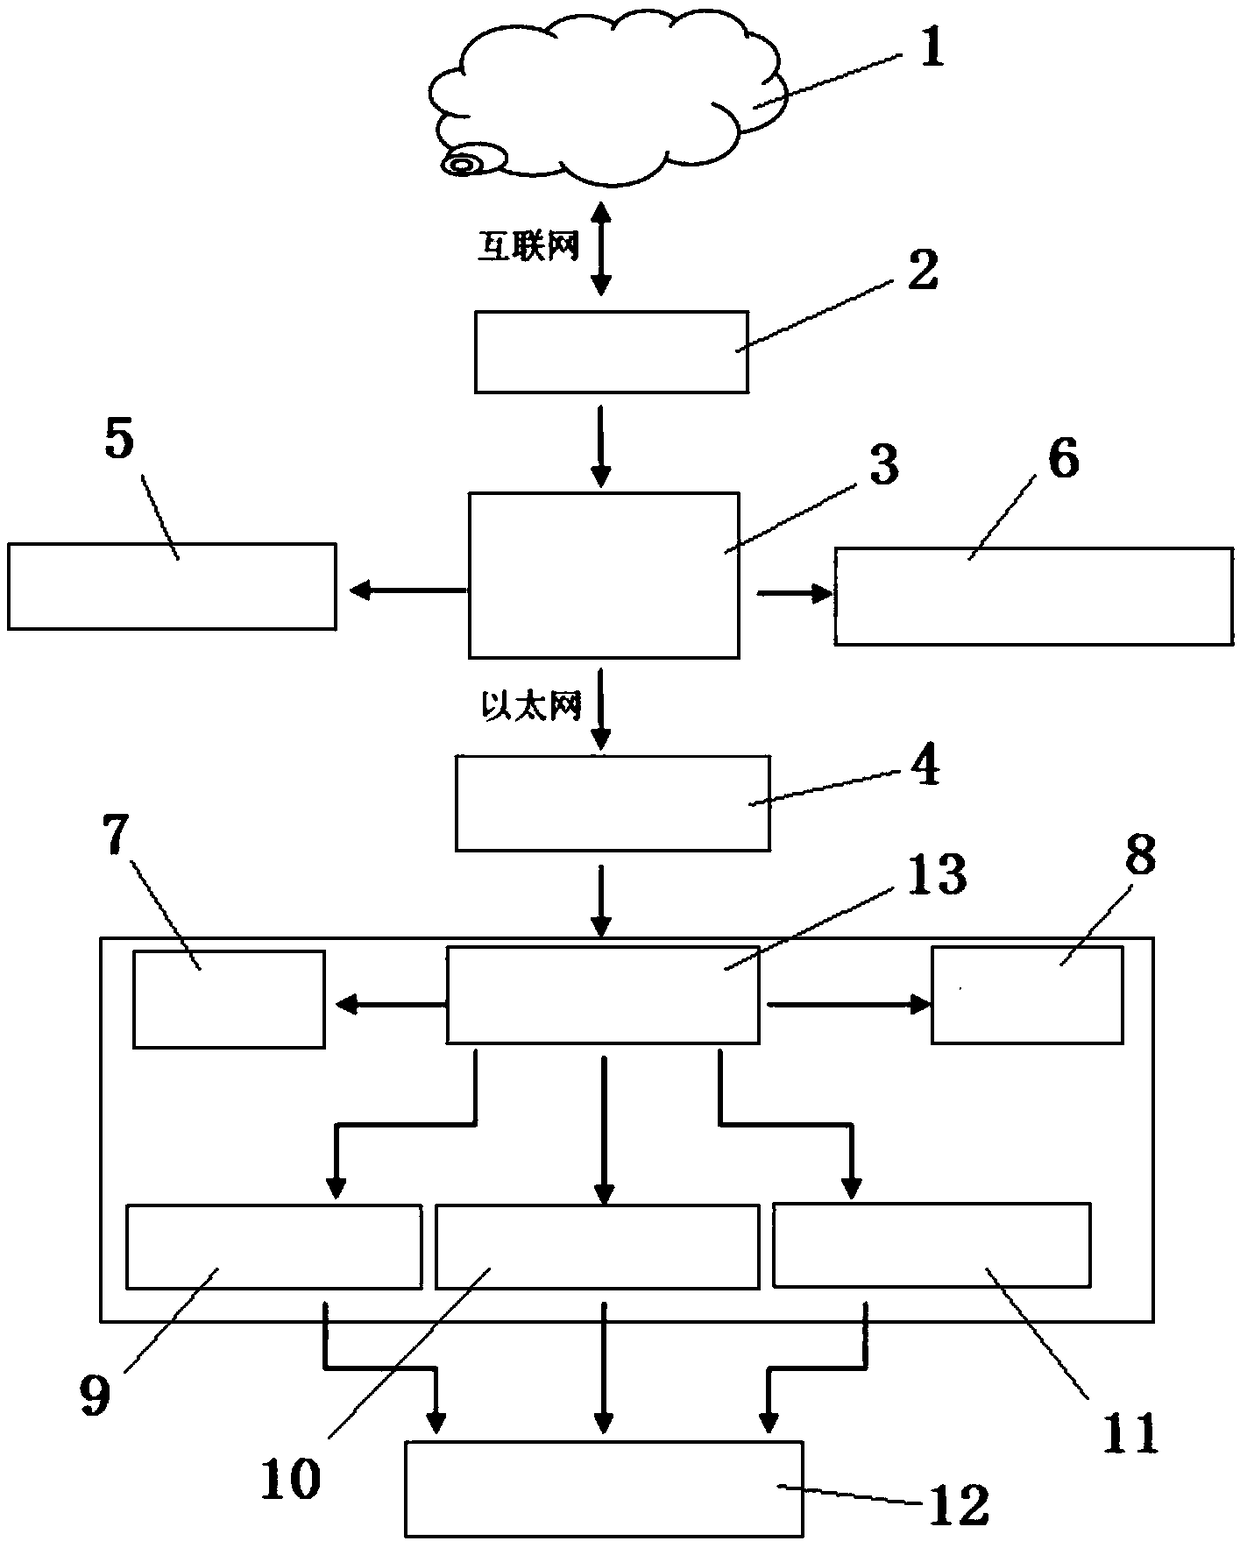 Control system and method of intelligent cloud cutter management system